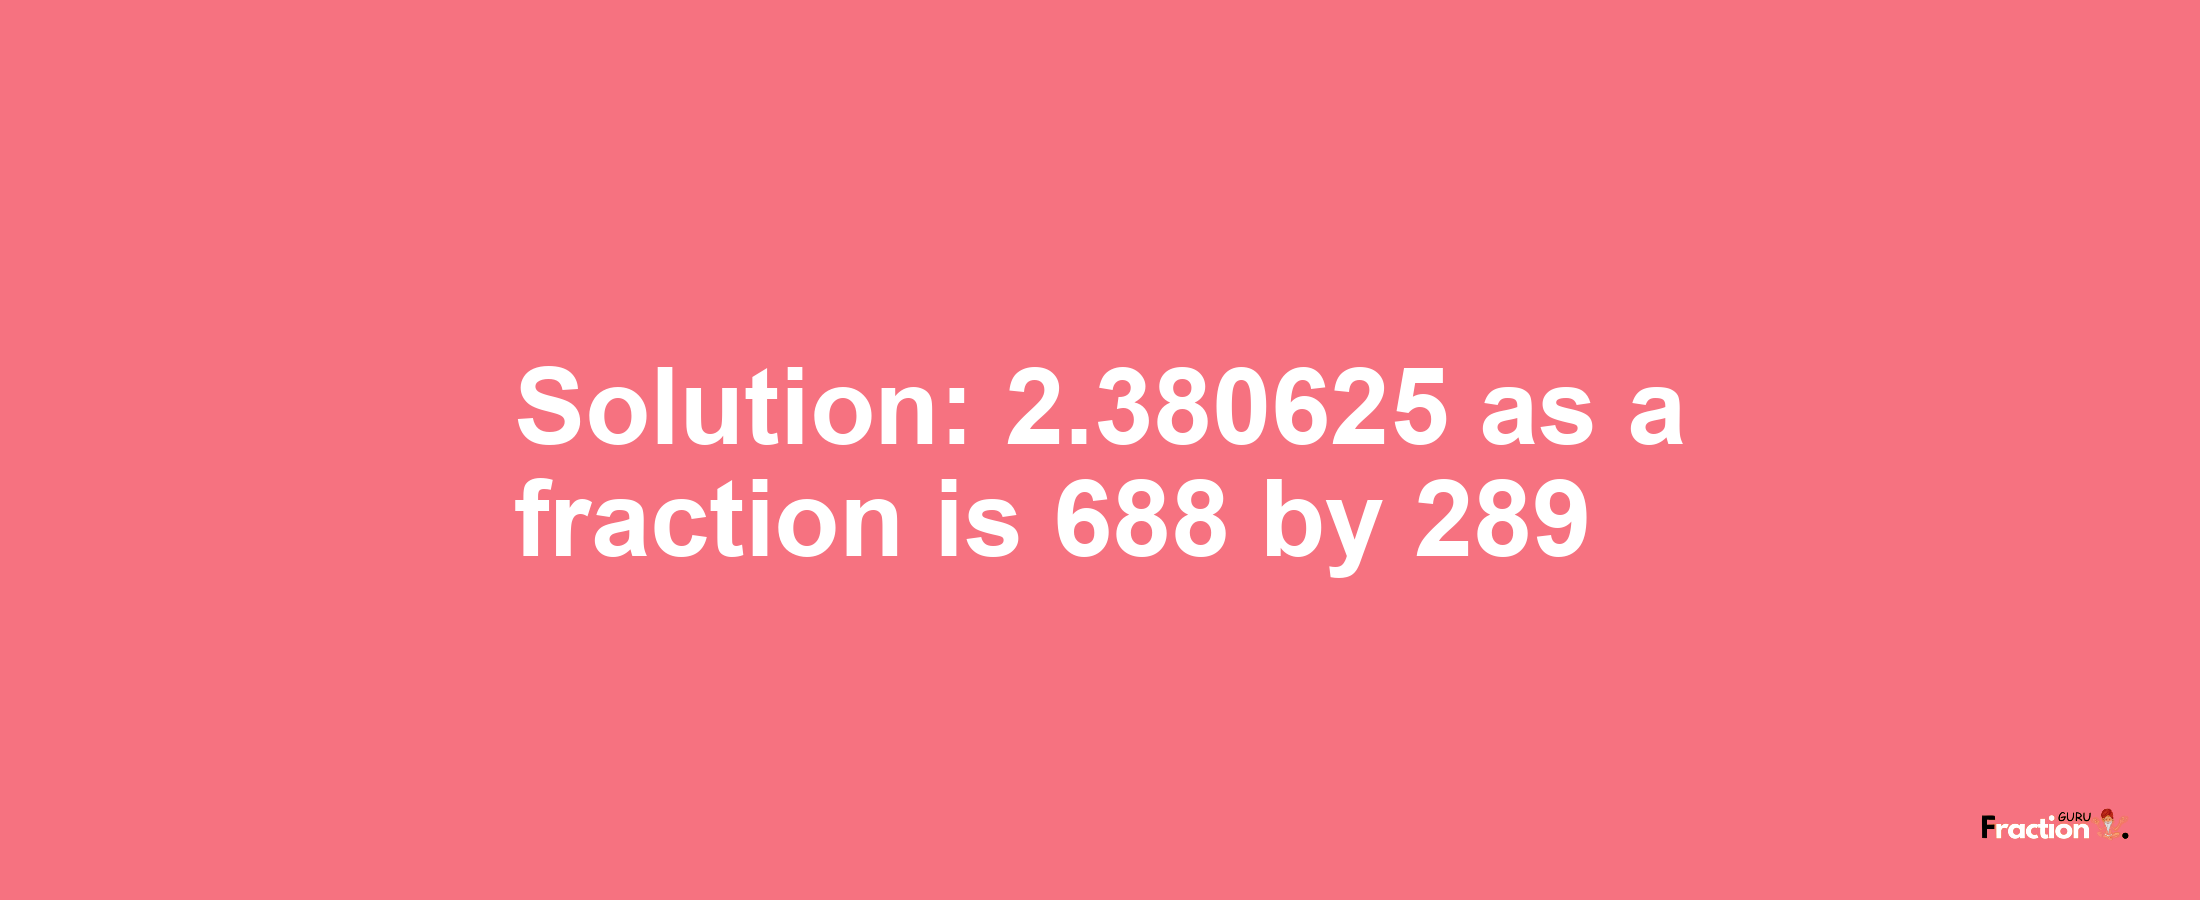 Solution:2.380625 as a fraction is 688/289